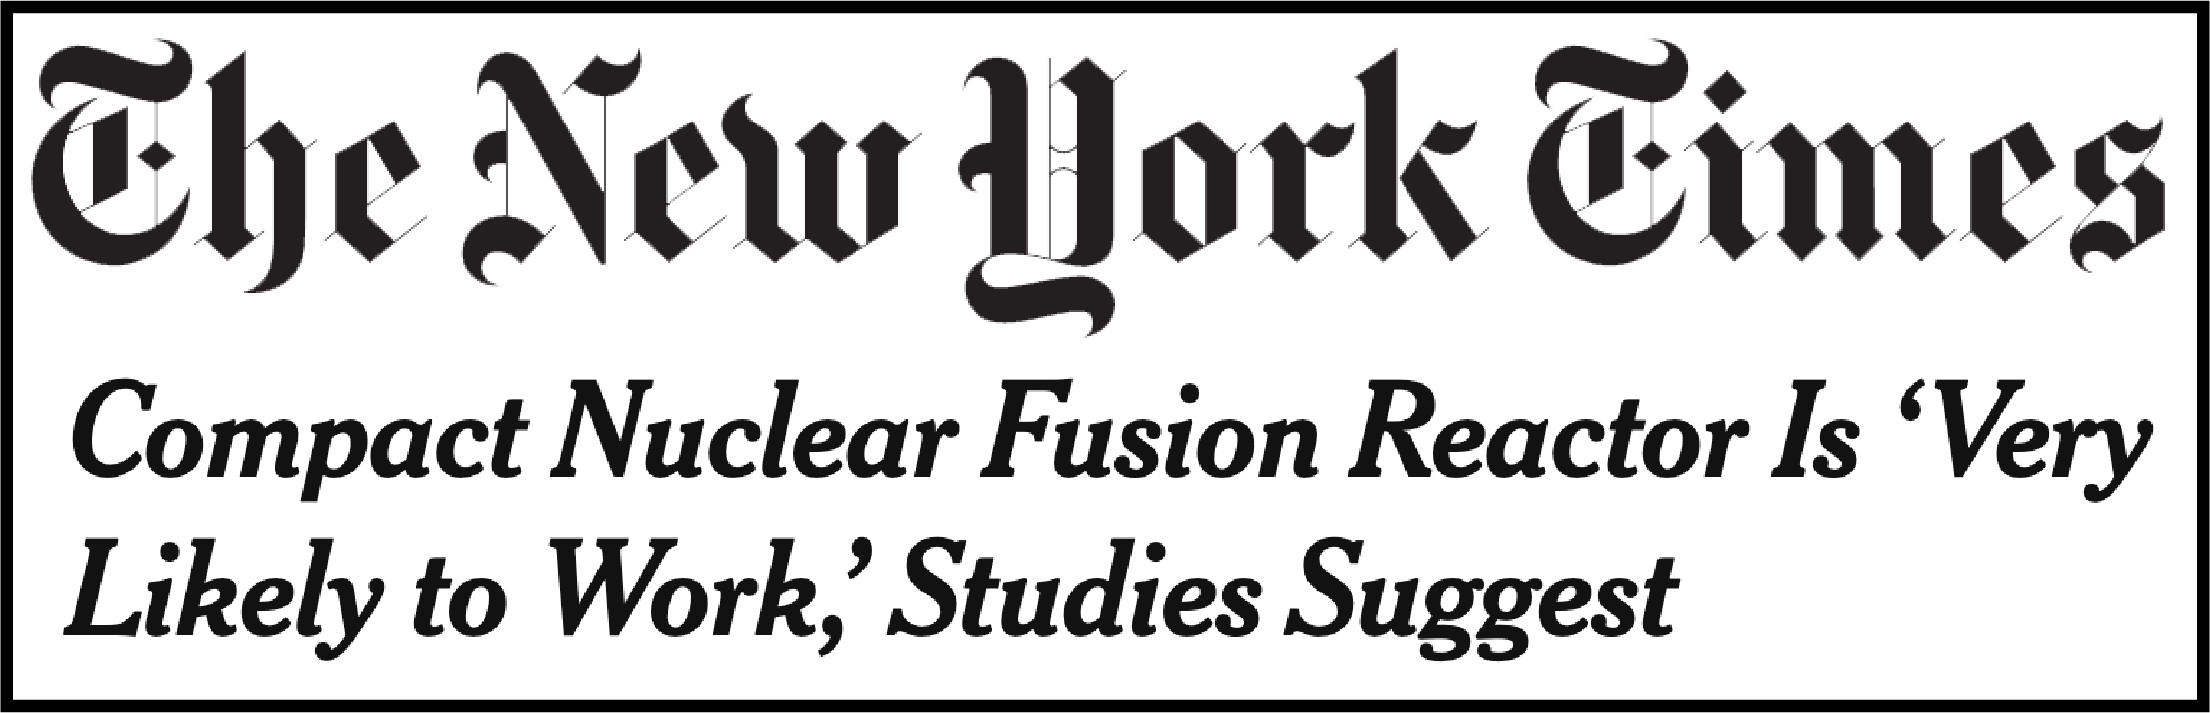 The New York Times. Compact Nuclear Fusion Reactor Is "Very likely to Work," Studies Suggest